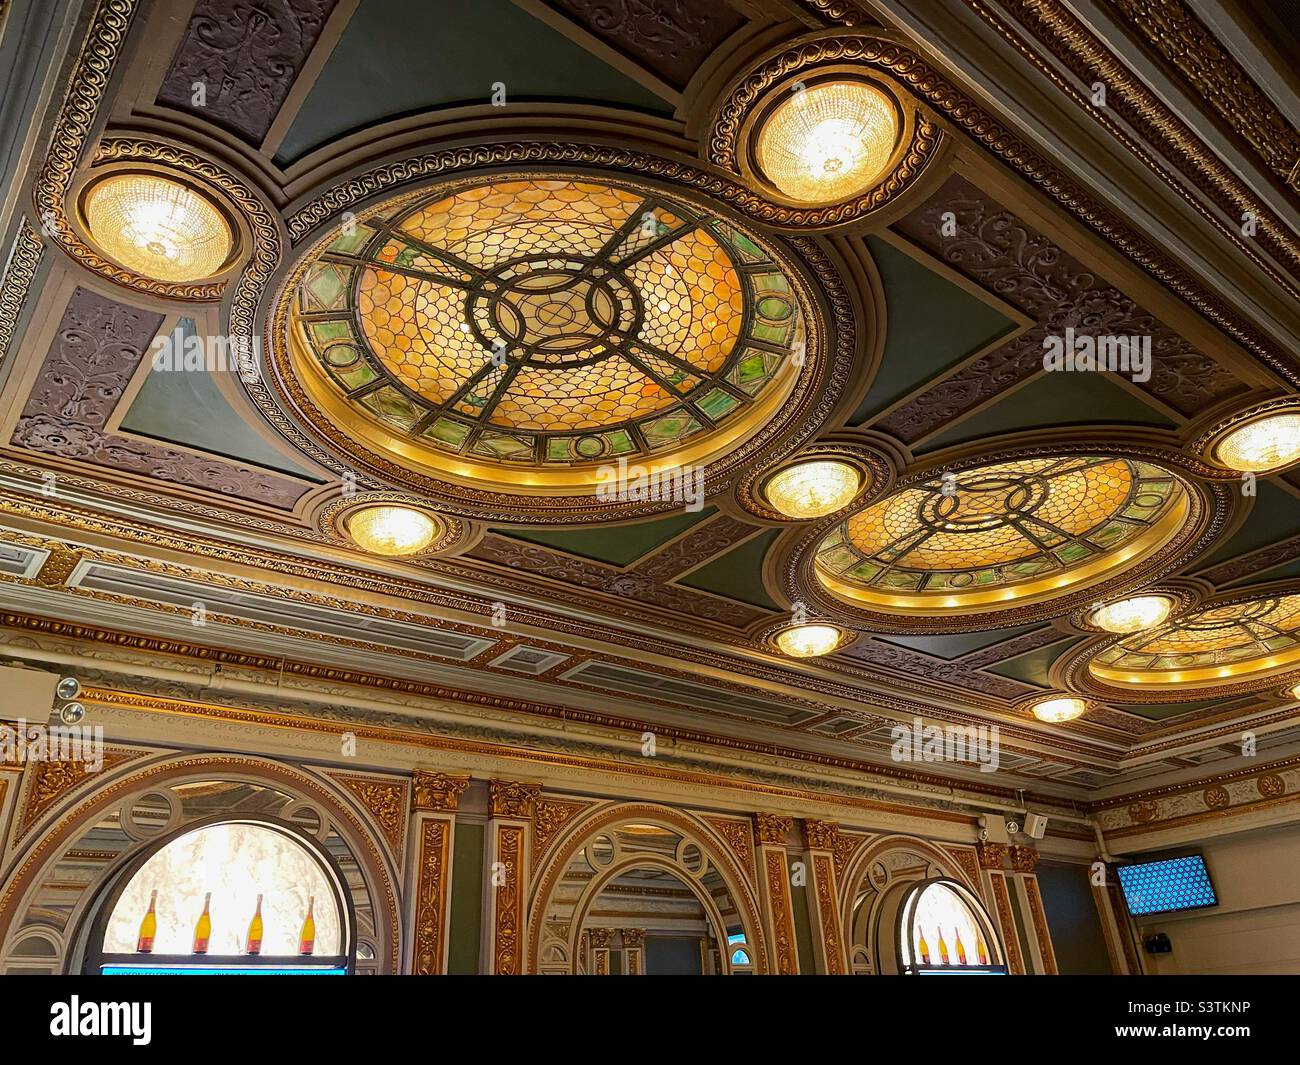 The ceiling of the lobby in the Hudson theater is ornate, 2022, New York City, United States Stock Photo